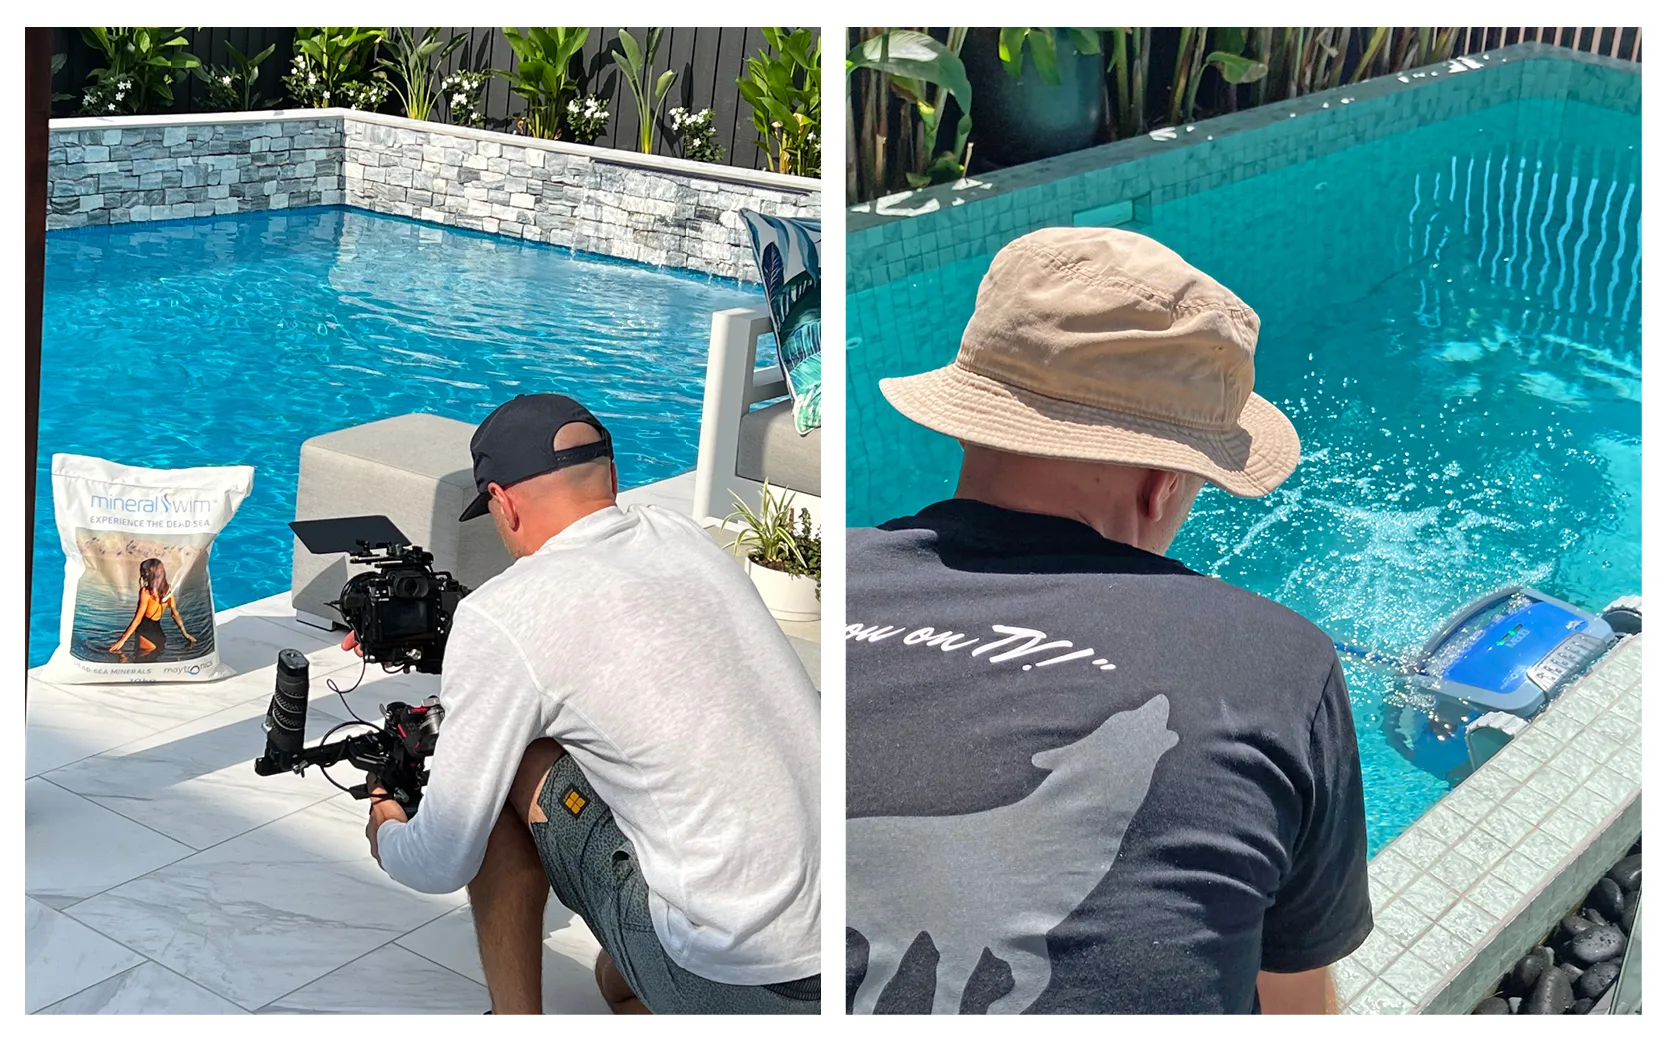 Australia's best pools on location filming Dolphin robot and Mineral Swim 